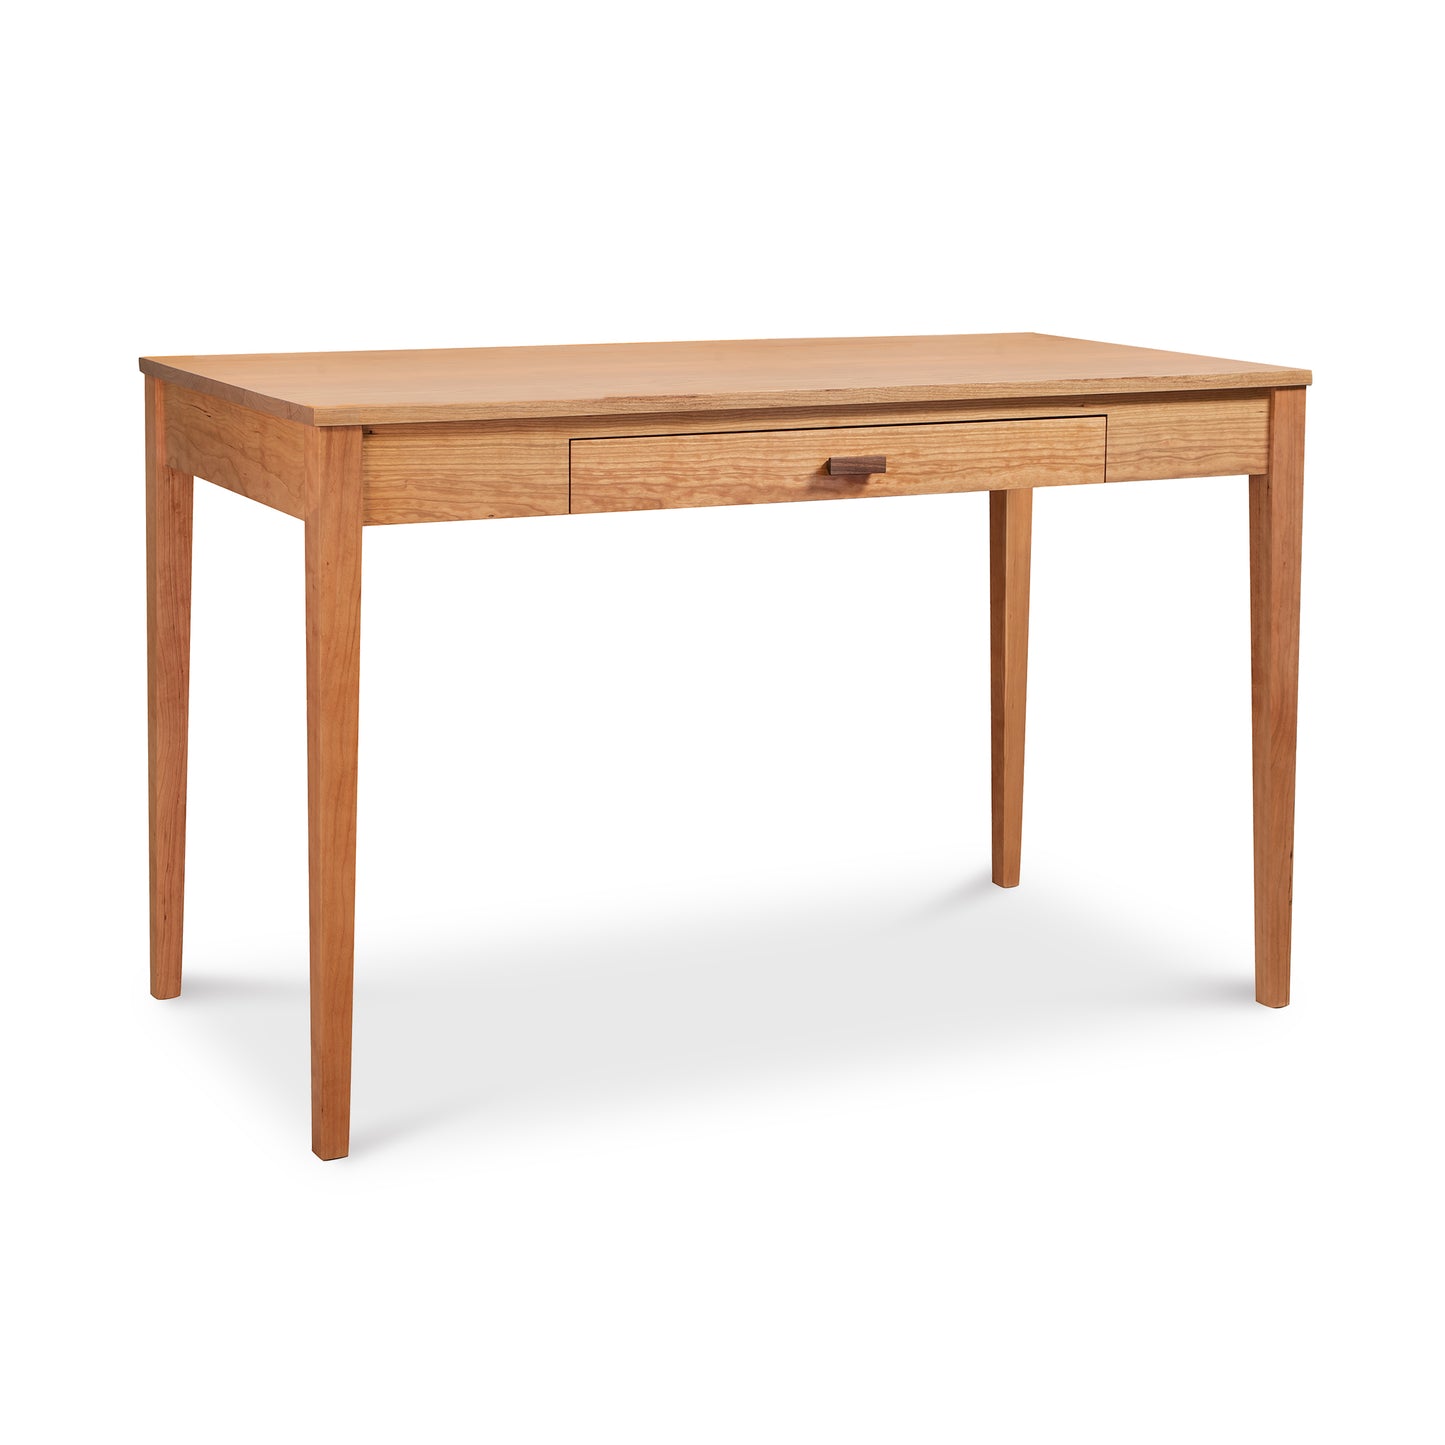 A handcrafted Maple Corner Woodworks Andover Modern Writing Desk with a drawer, offering contemporary style.